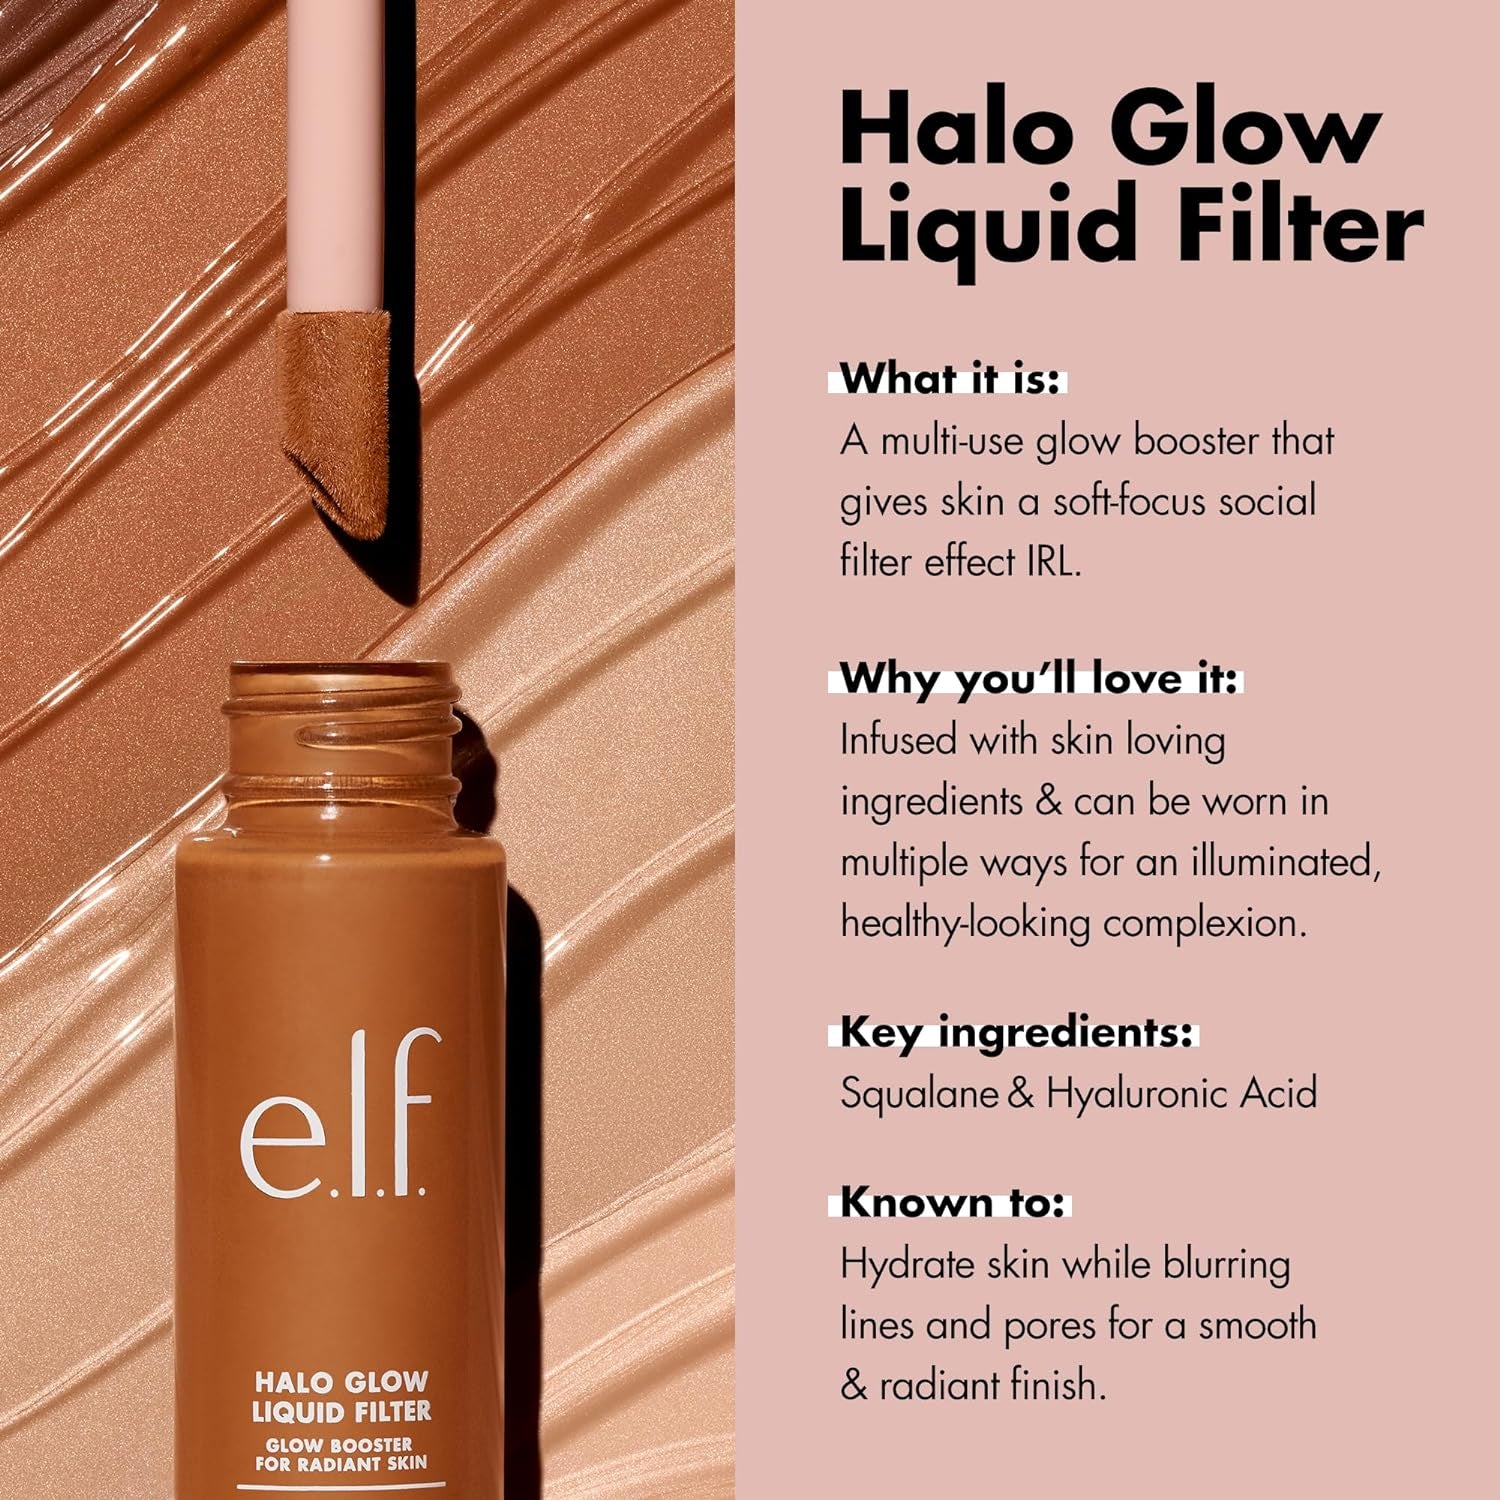 Halo Glow Liquid Filter, Complexion Booster for a Glowing, Soft-Focus Look, Infused with Hyaluronic Acid, Vegan & Cruelty-Free, 2 Fair/Light